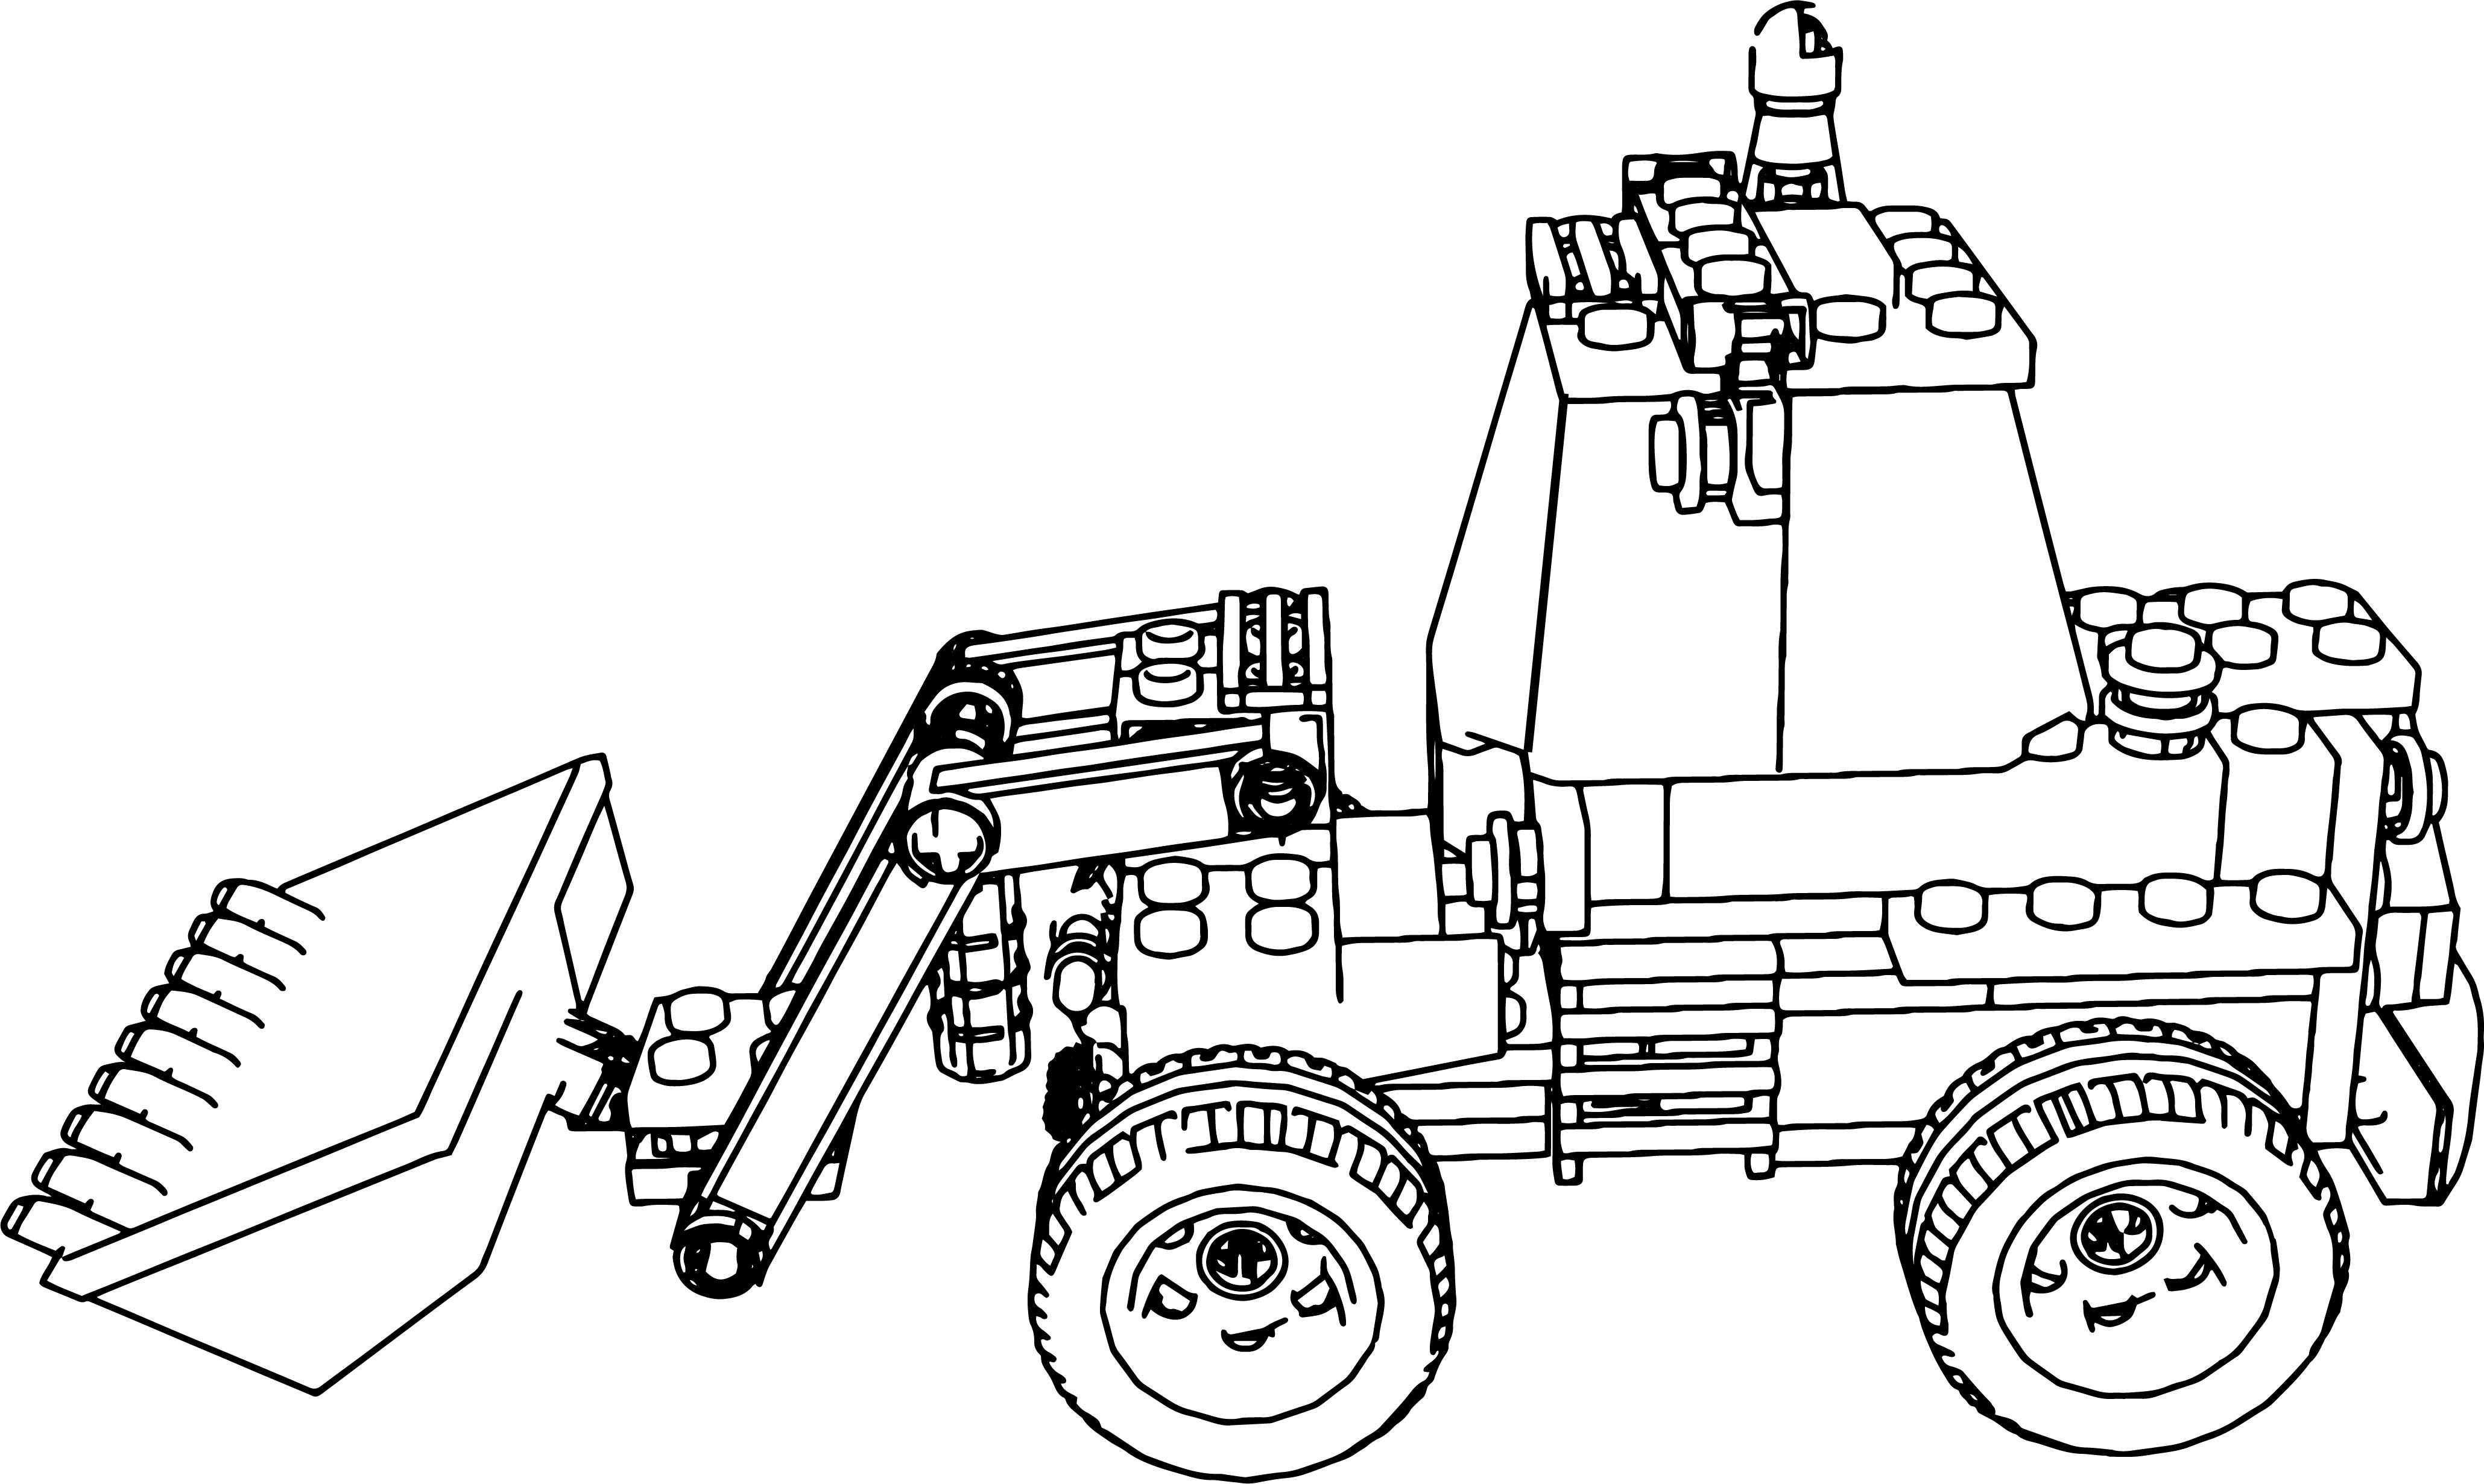 Lego Fire Truck Coloring Pages at GetColorings.com | Free printable